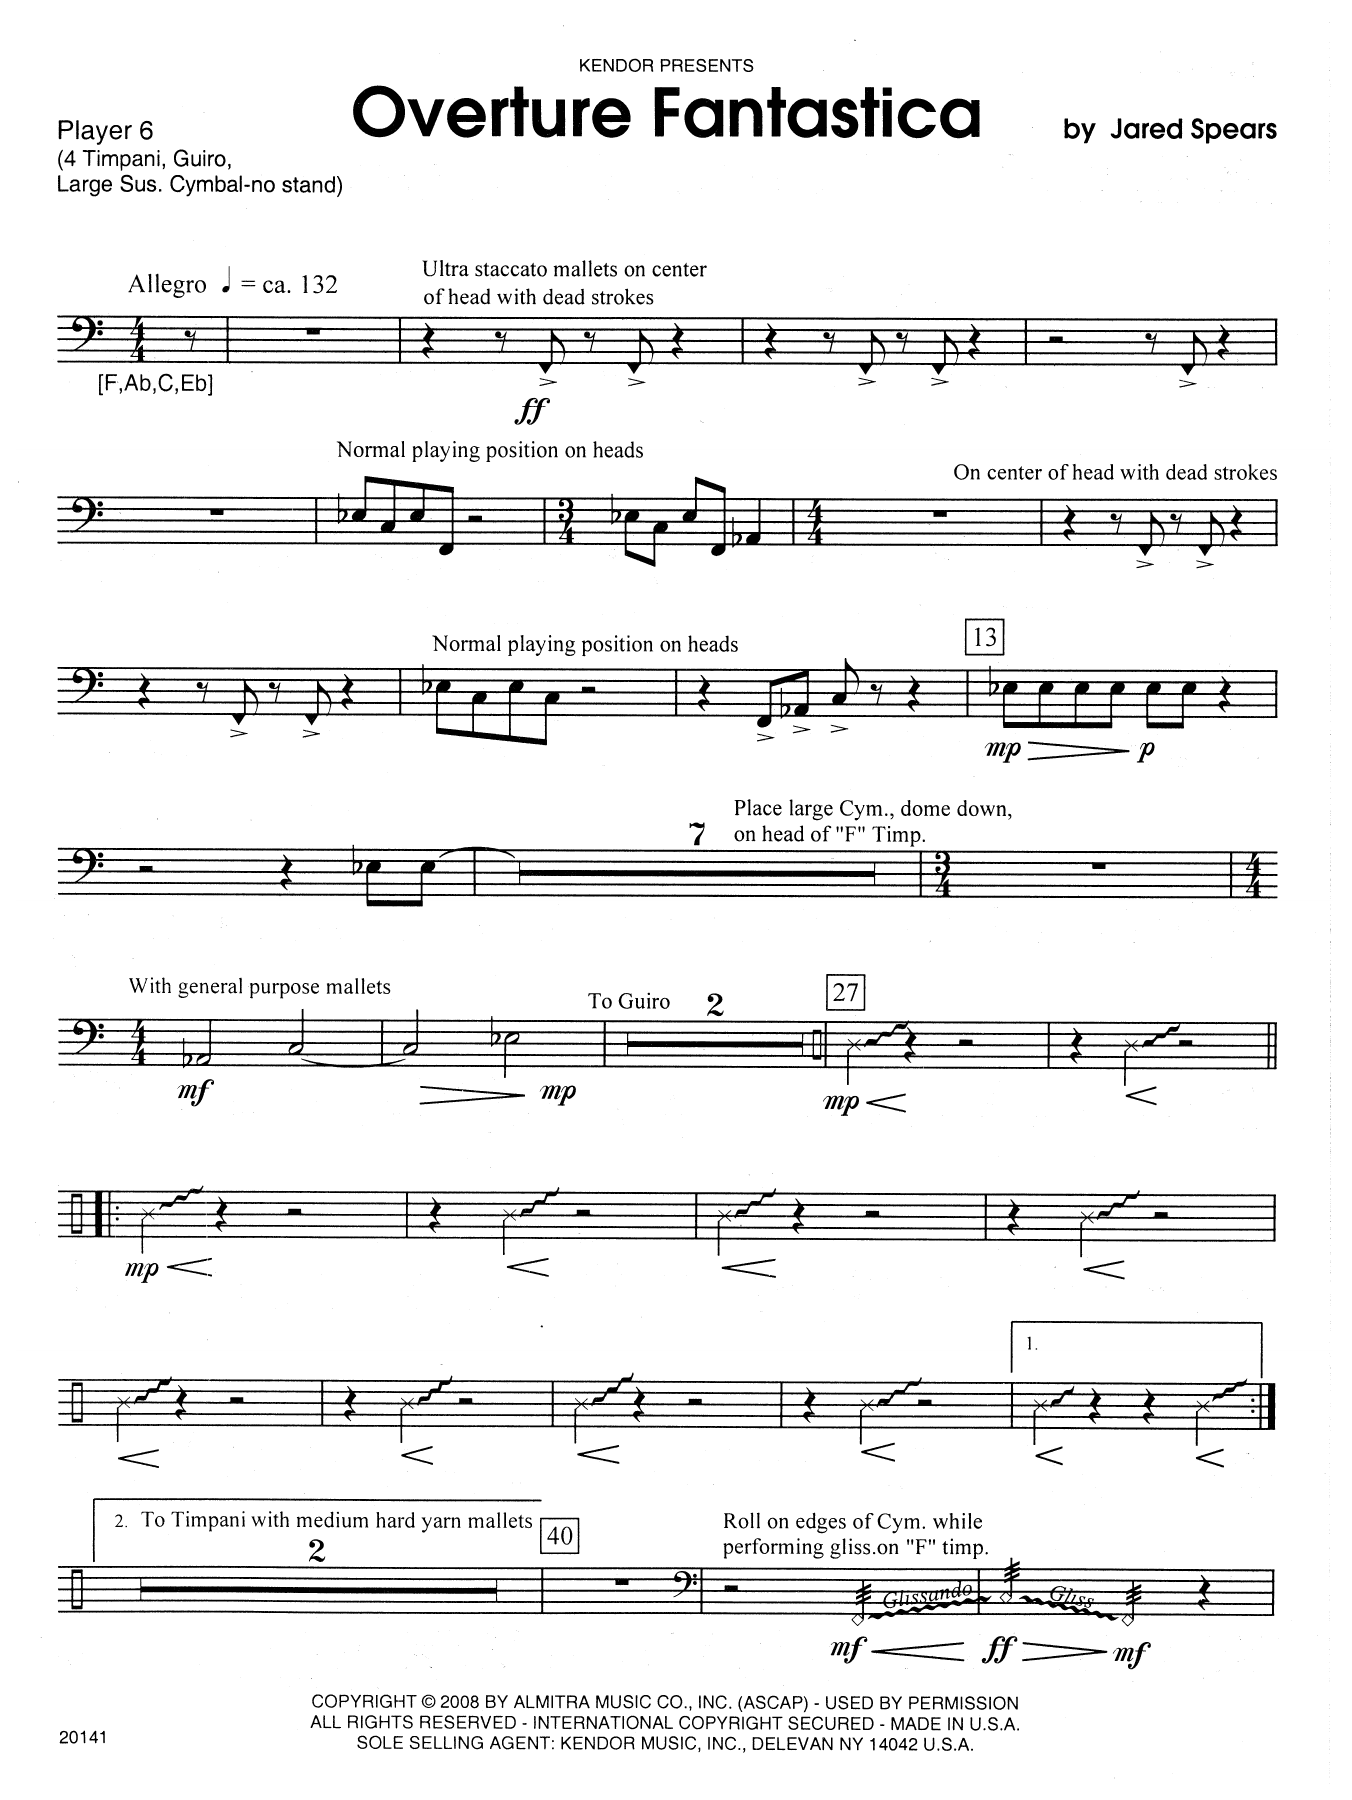 Download Jared Spears Overture Fantastica - Percussion 6 Sheet Music